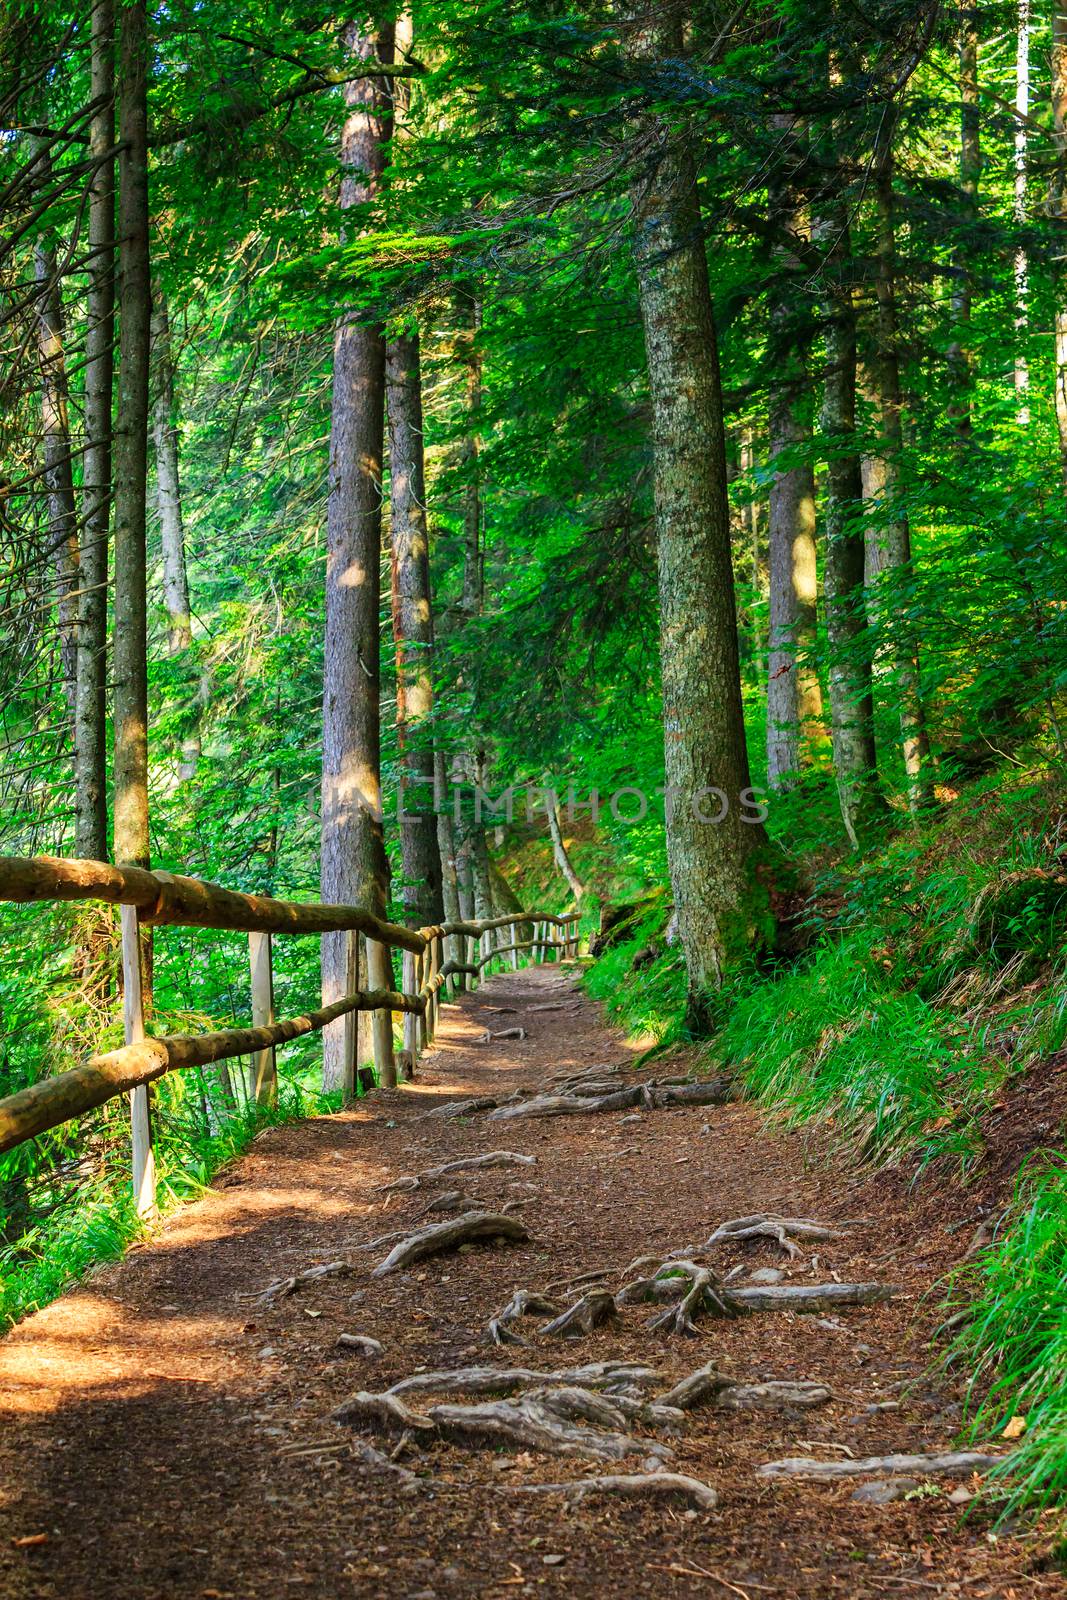 narrow mountain path in a coniferous forest. small wooden fence near the slope of the path. tree roots have sprouted across the footpath.